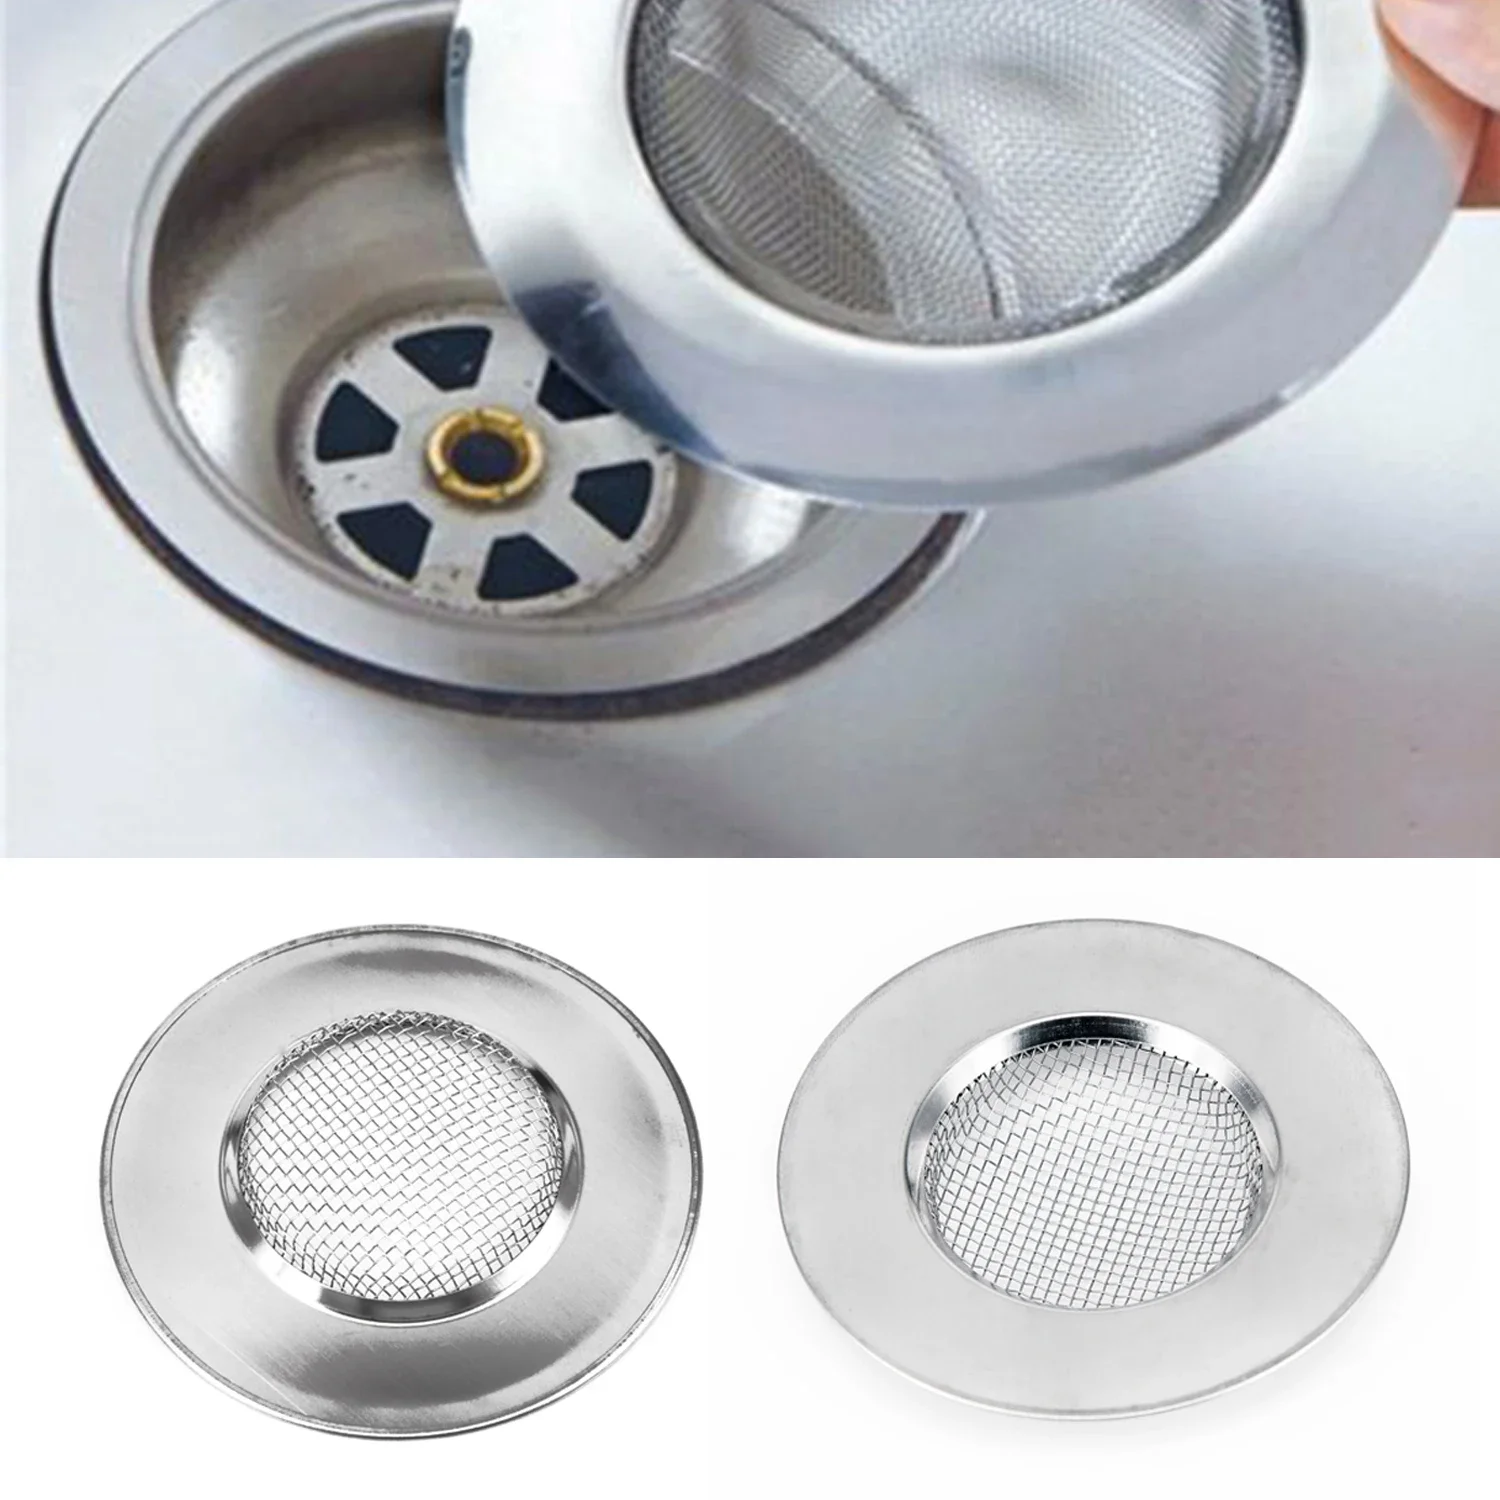 Stainless Steel Bathtub Hair Catcher Stopper Shower Drain Hole Filter With Handle Metal Sink Strainer Floor Drain For Kitchenl stainless steel bathtub hair catcher stopper shower drain hole filter trap kitchen metal sink strainer floor drain